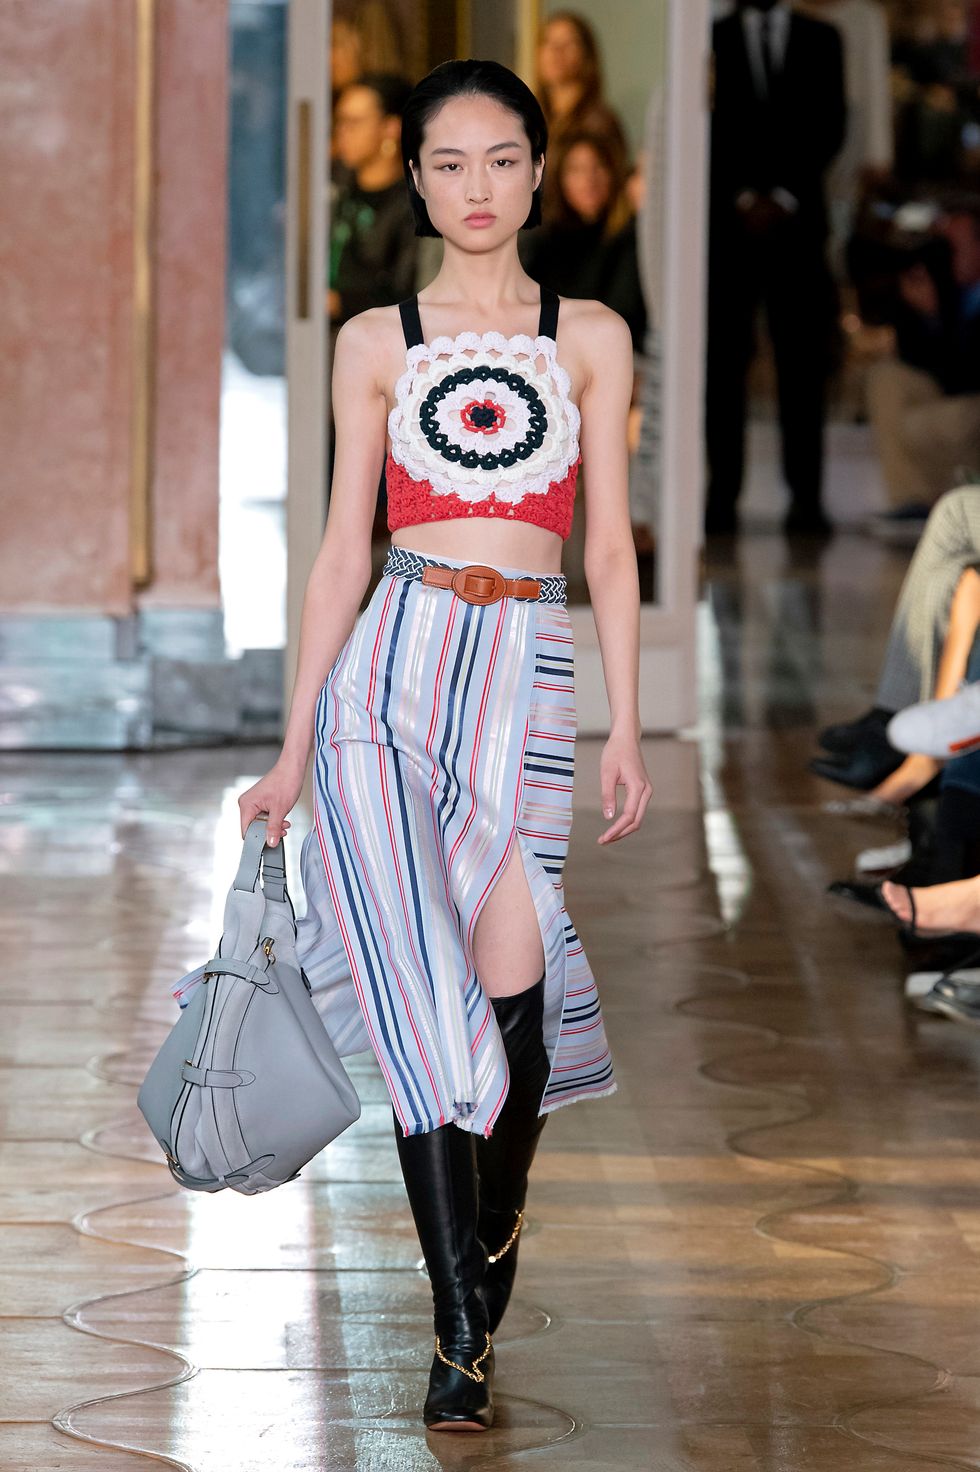 The 10 Biggest Fashion Trends For Spring 2020 - PAPER